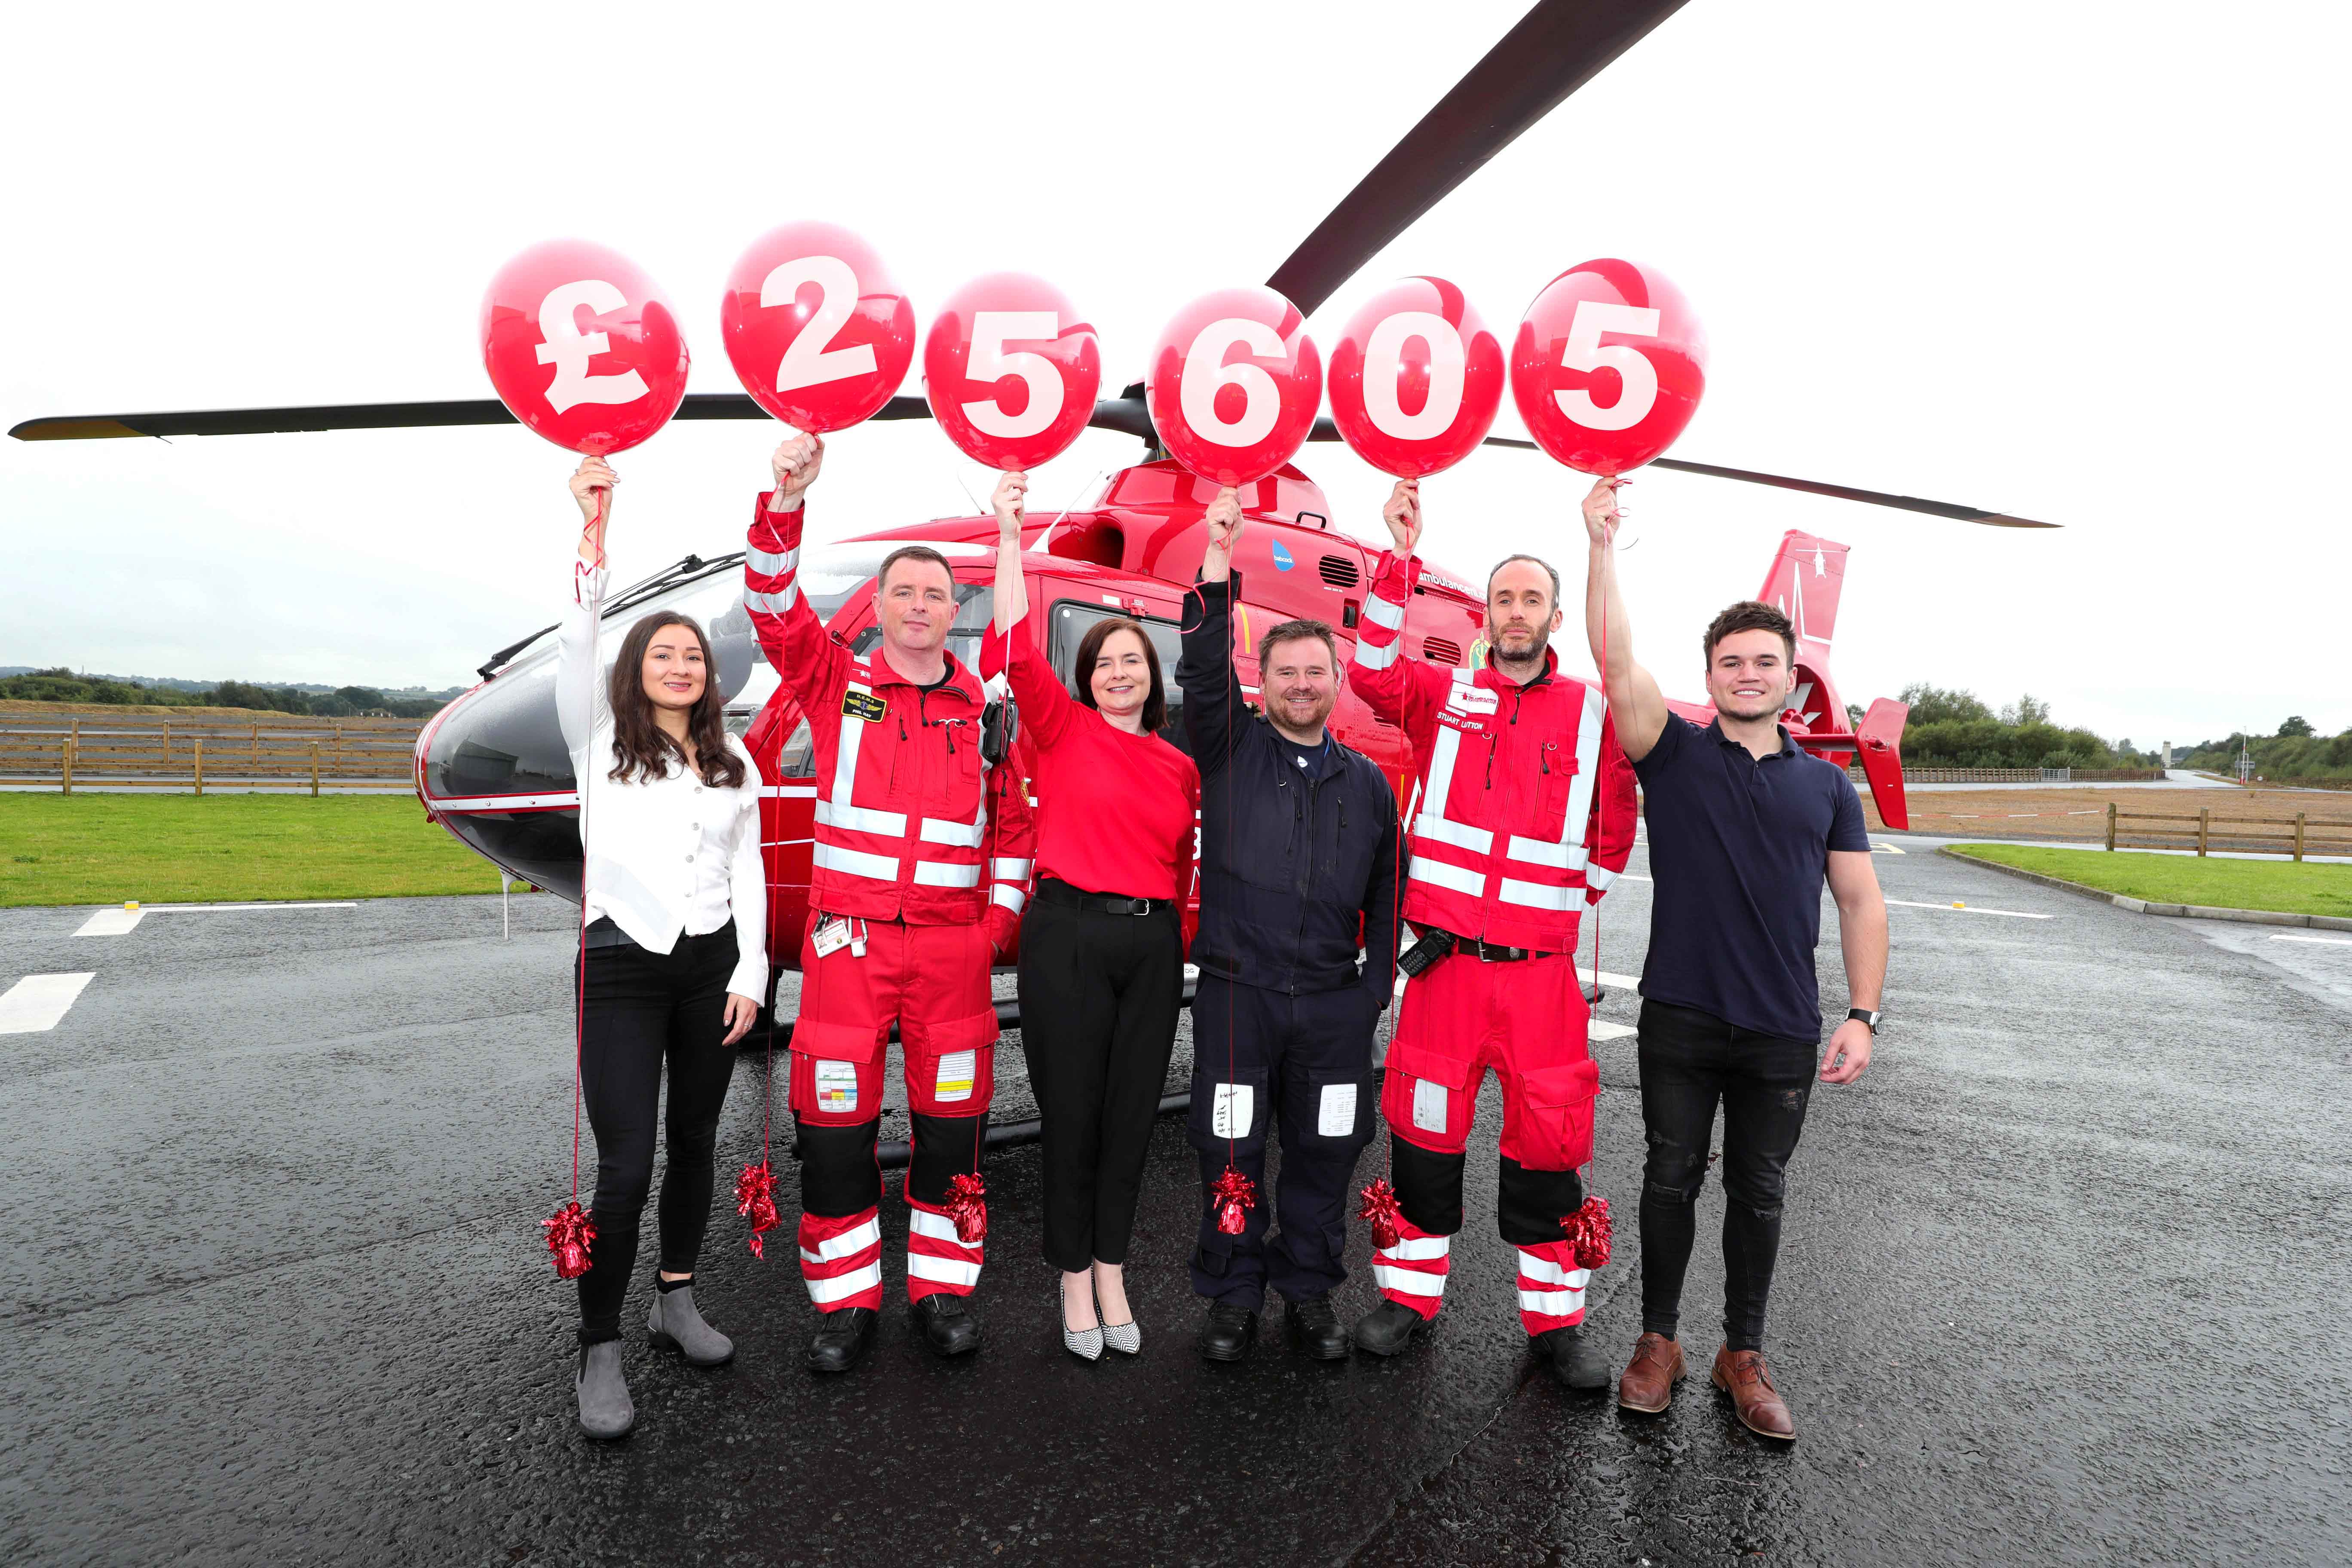 Air Ambulance NI receives £25k Boost from soft drink giant